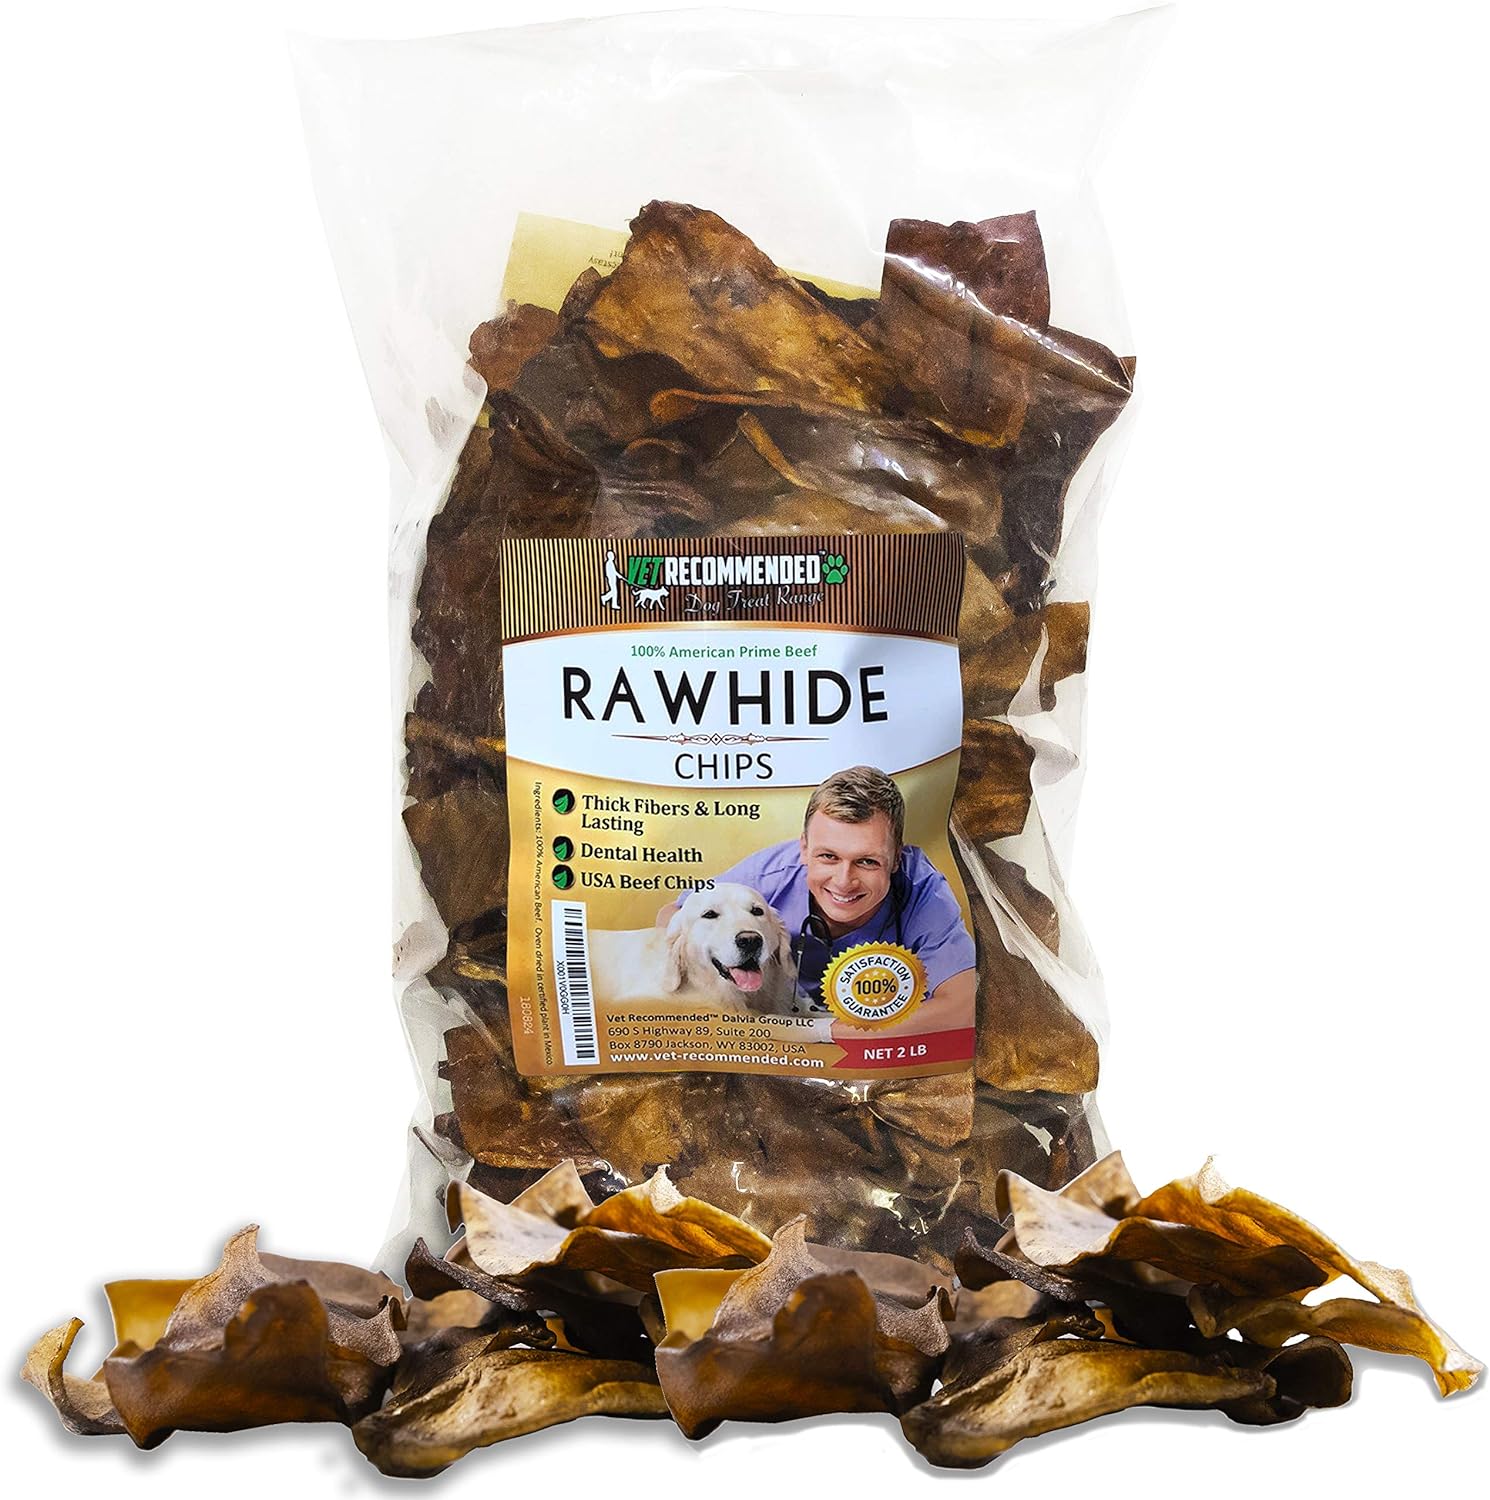 Premium Beef Rawhide Chips for Dogs (2lb Bag) Thick Fiber and Long Lasting Dog Chew. Made in USA